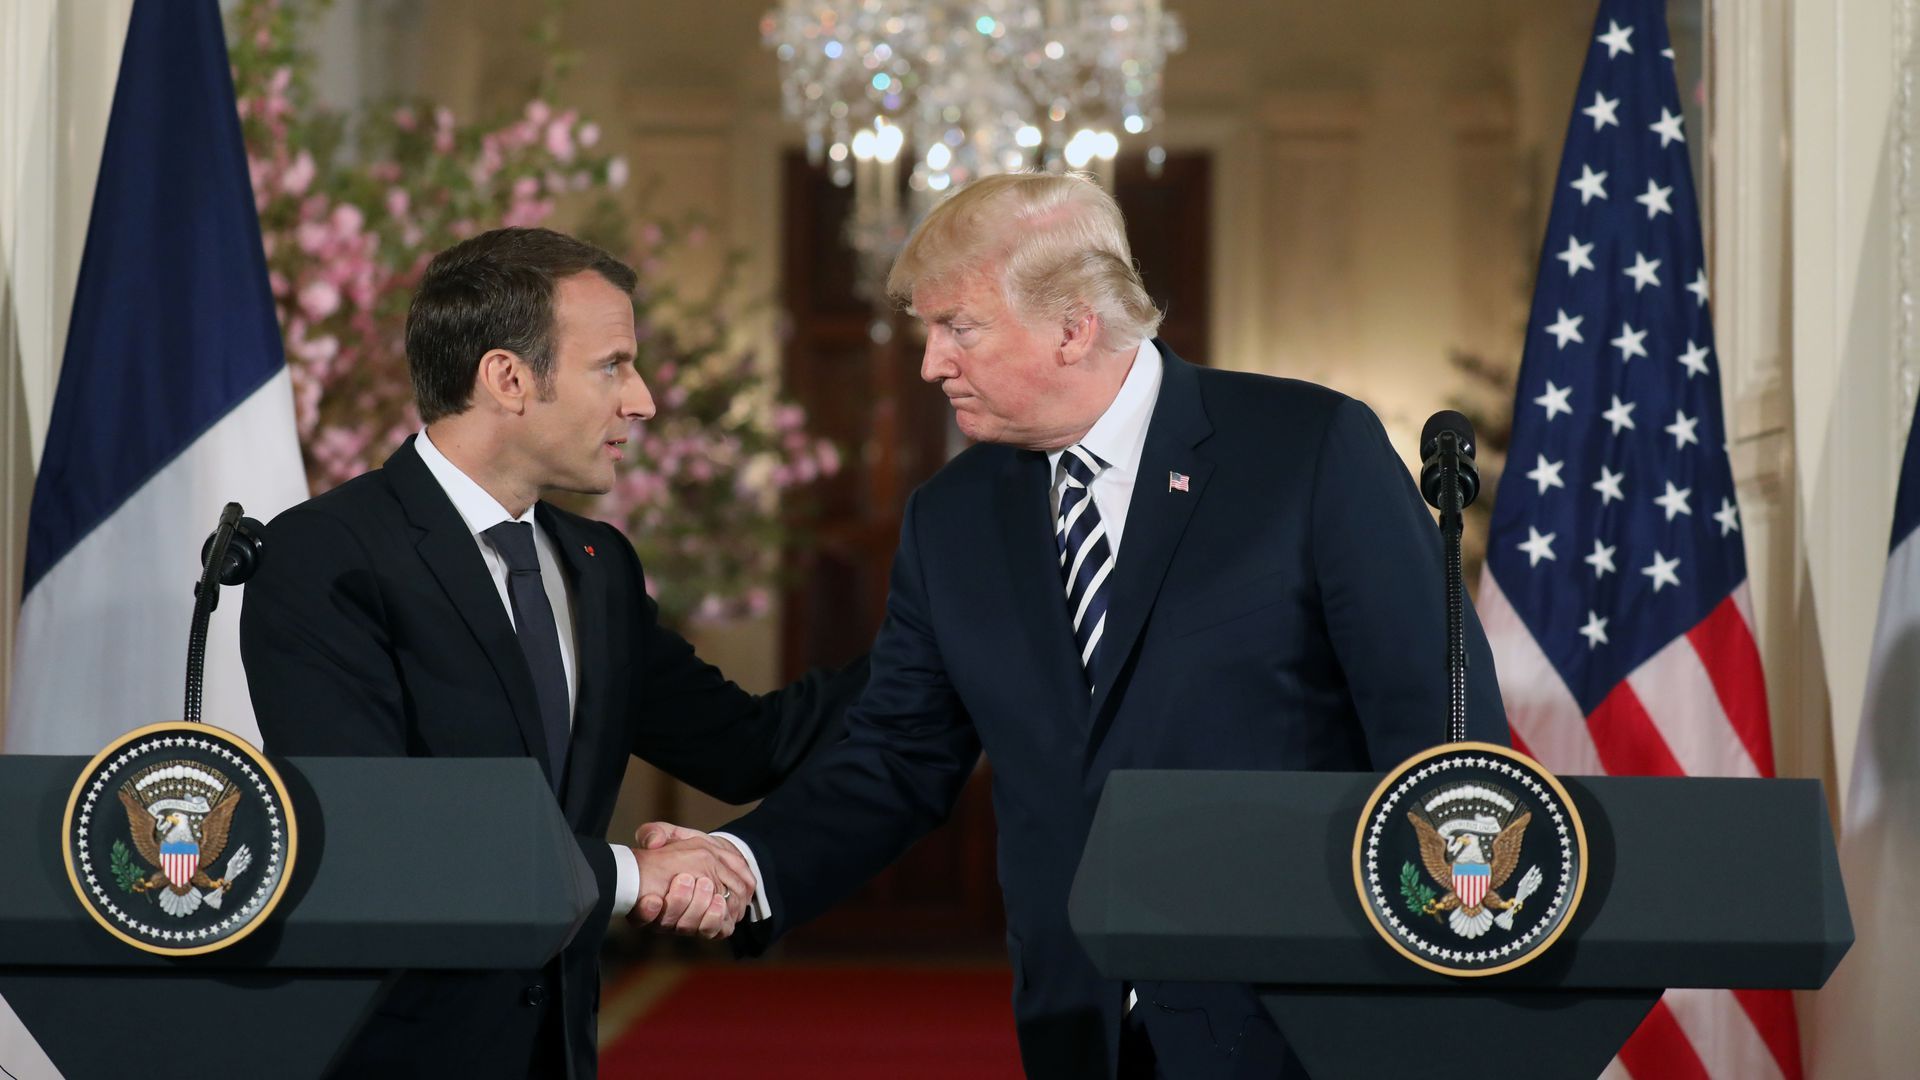 Trump and Macron shake hands behind their podiums